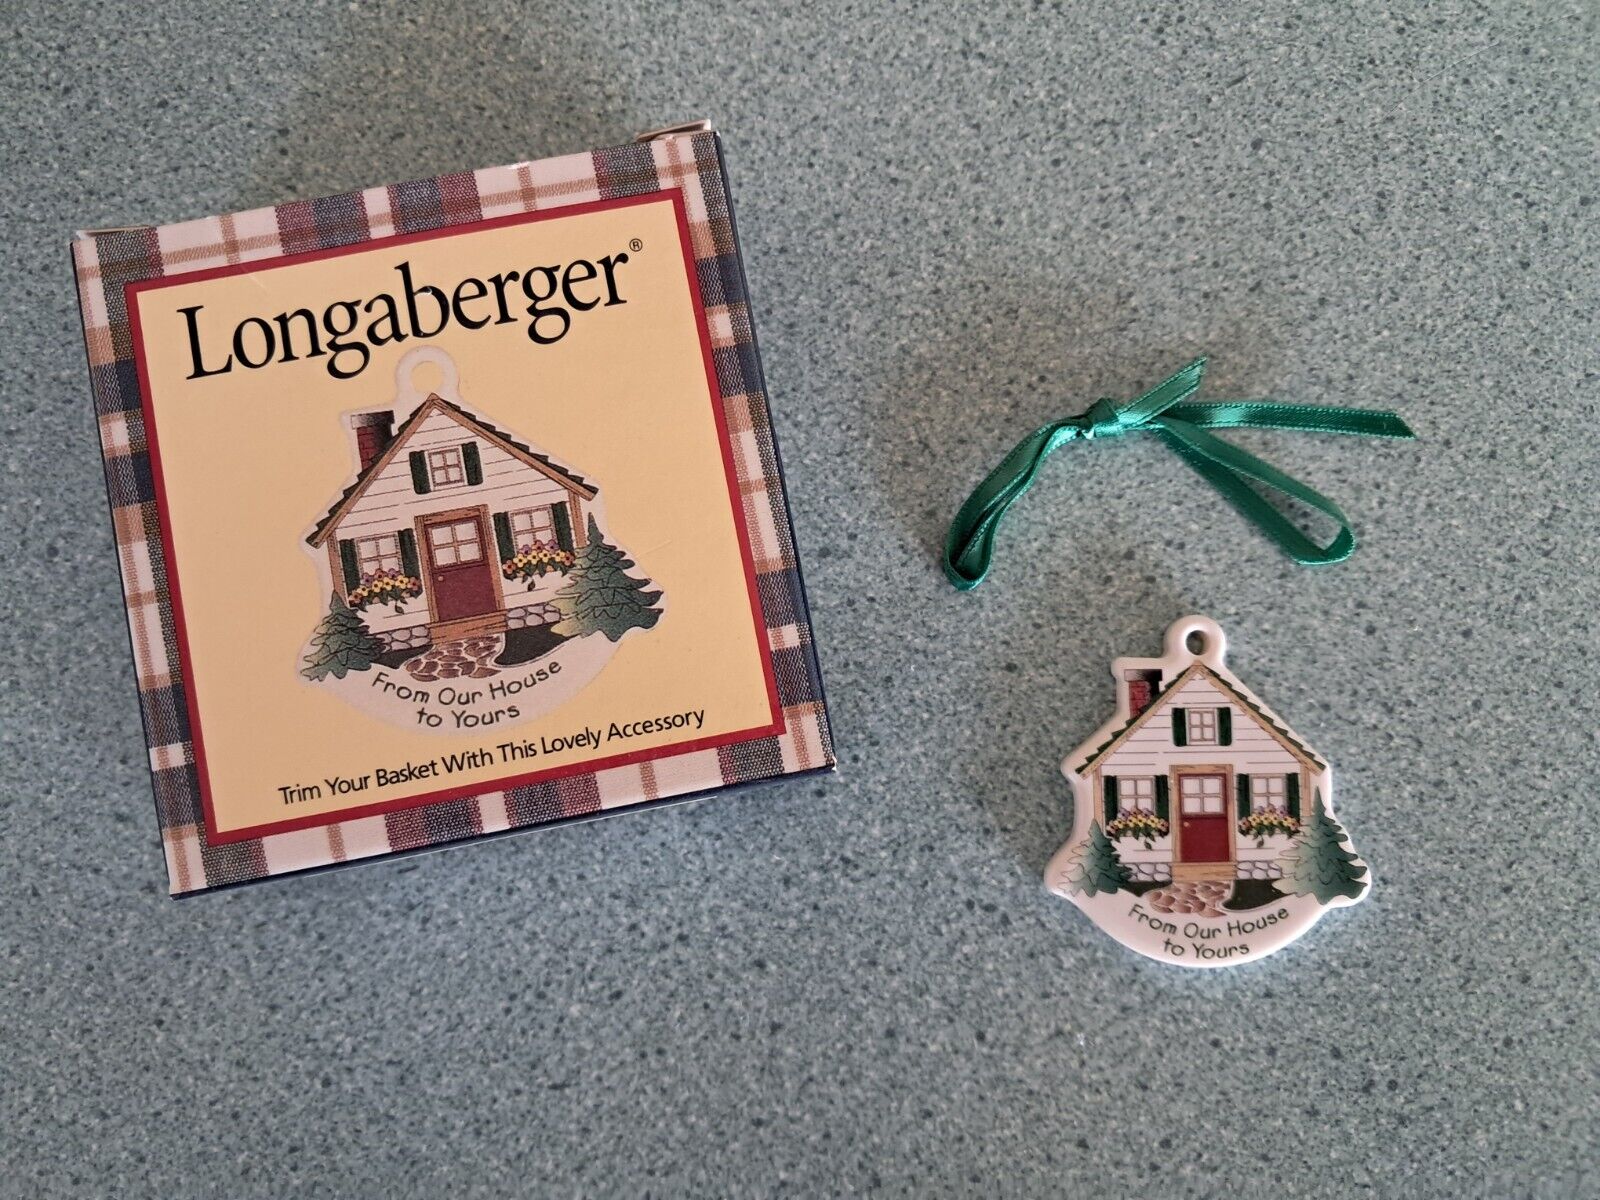 Longaberger From Our House to Yours tie-on with ribbon for your basket NEW